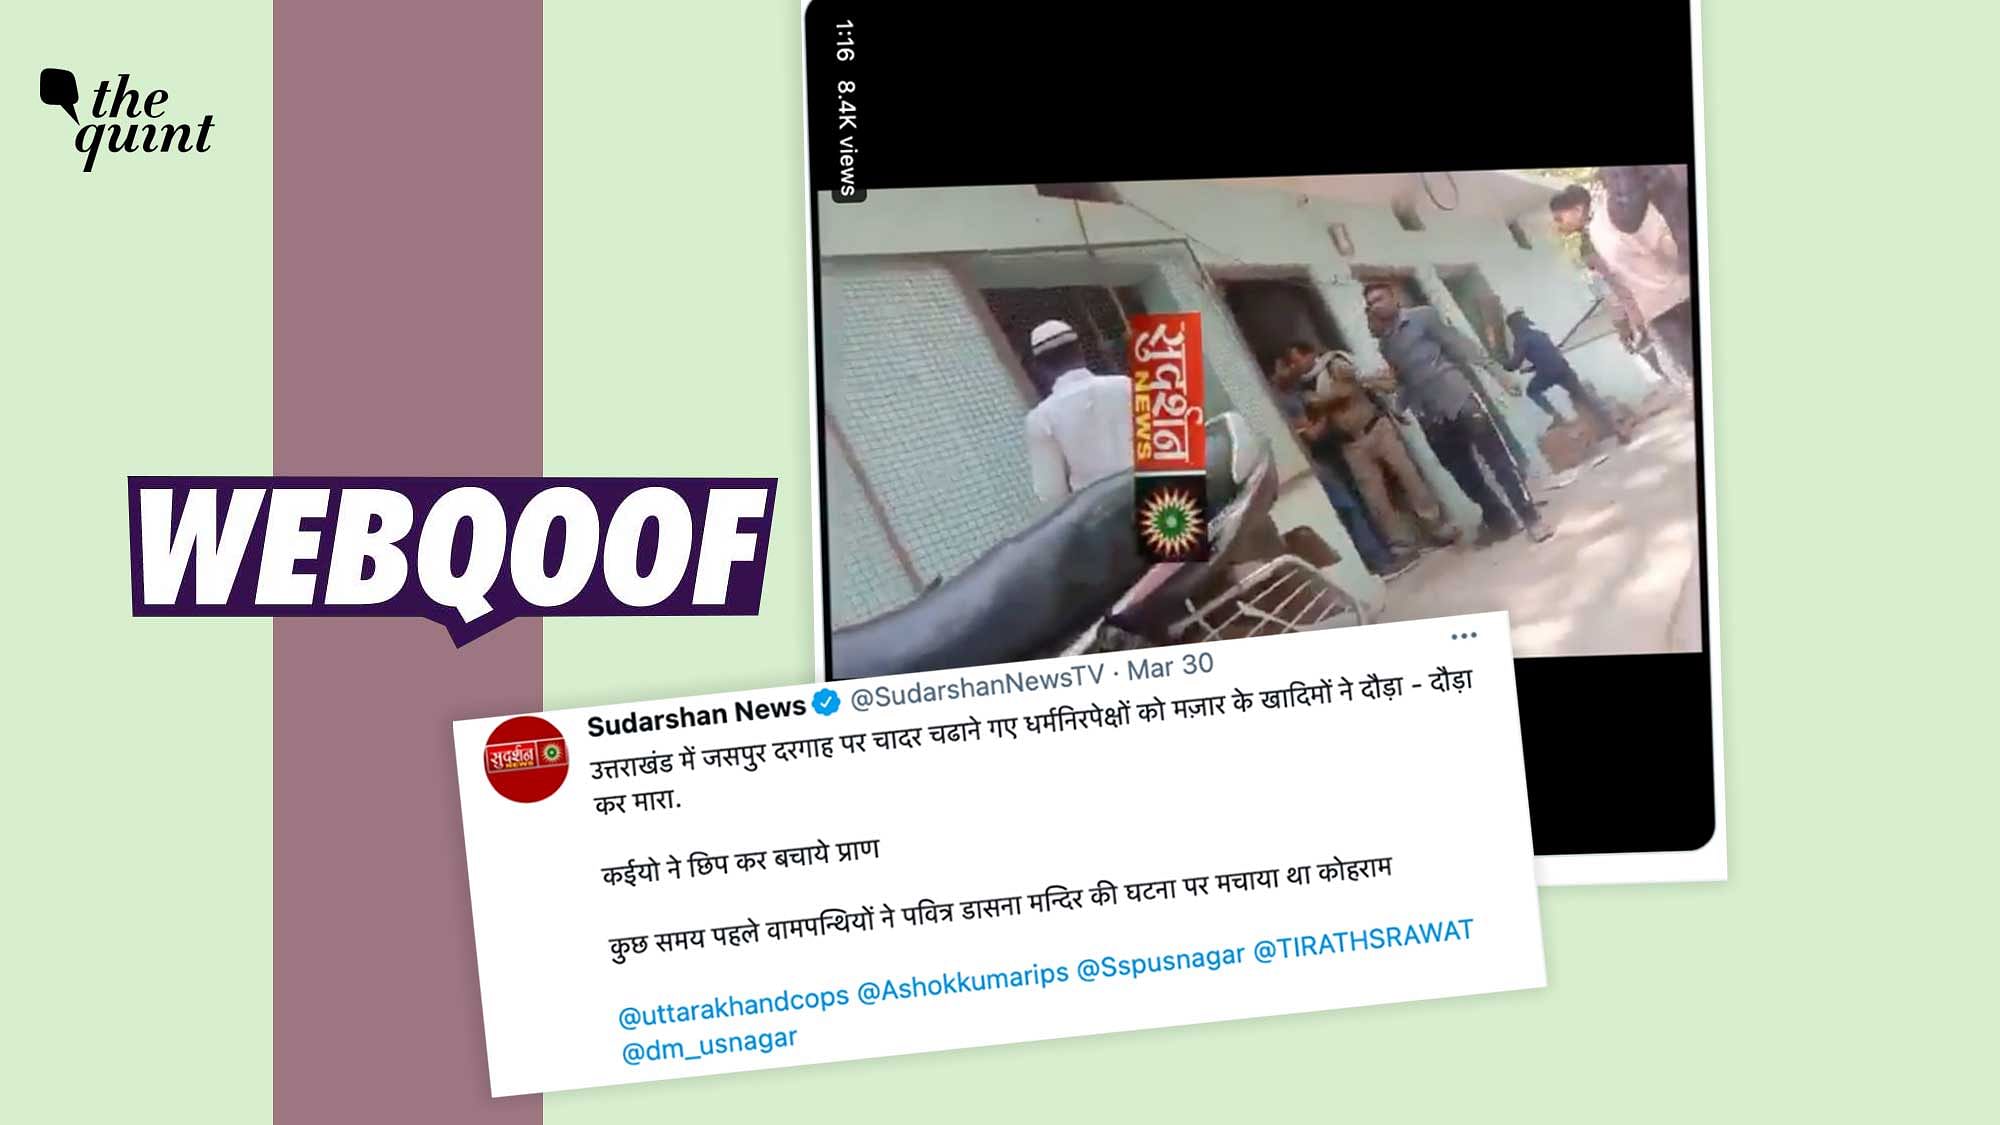 A video of the fight was shared by Sudarshan News to falsely claim that the matter was communal in nature.